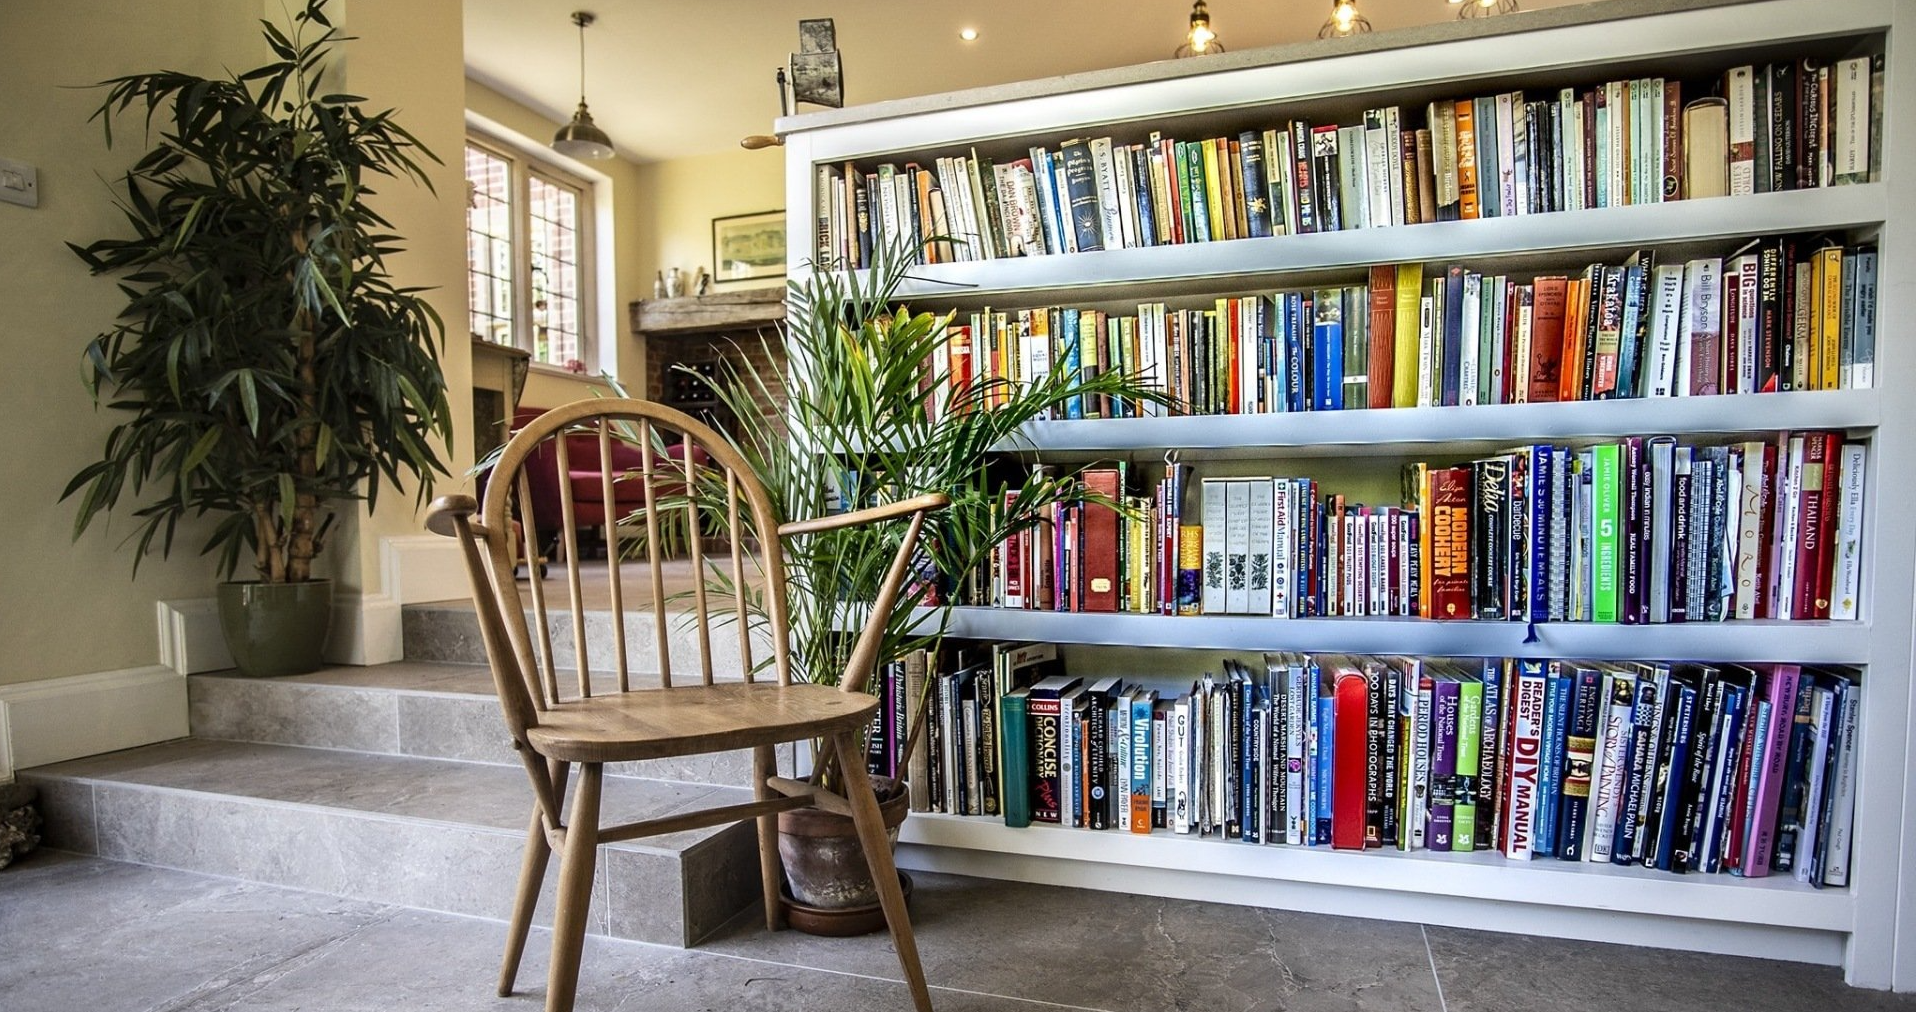 wooden chair and bookcase full of books